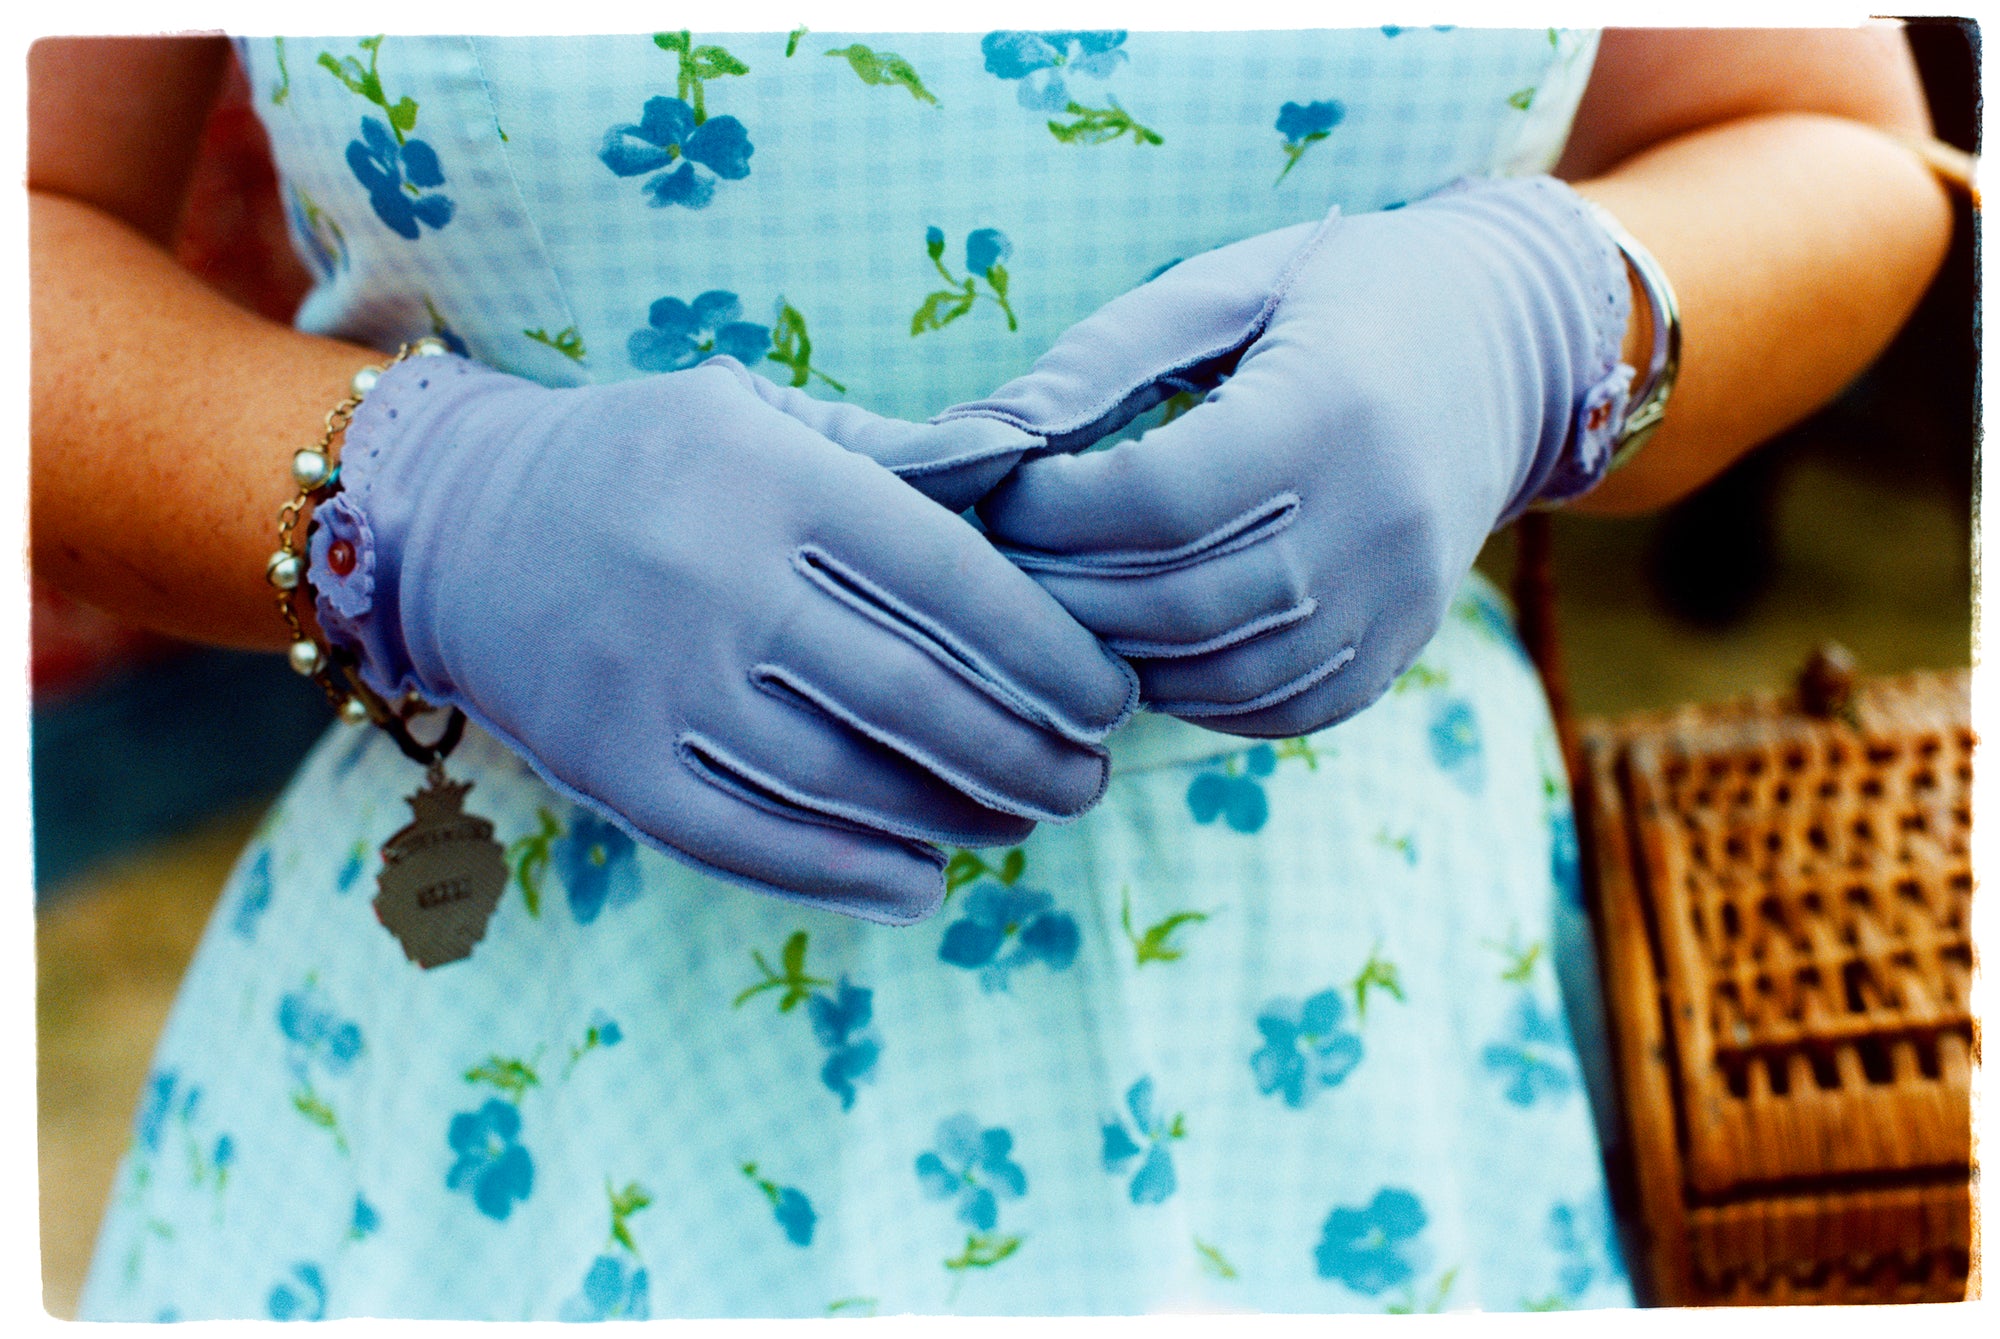 Photograph by Richard Heeps.  Retro lilac gloves are together in front of a blue flowered dress worn by a woman at the Goodwood Revival.  To the side is a wicker basket.